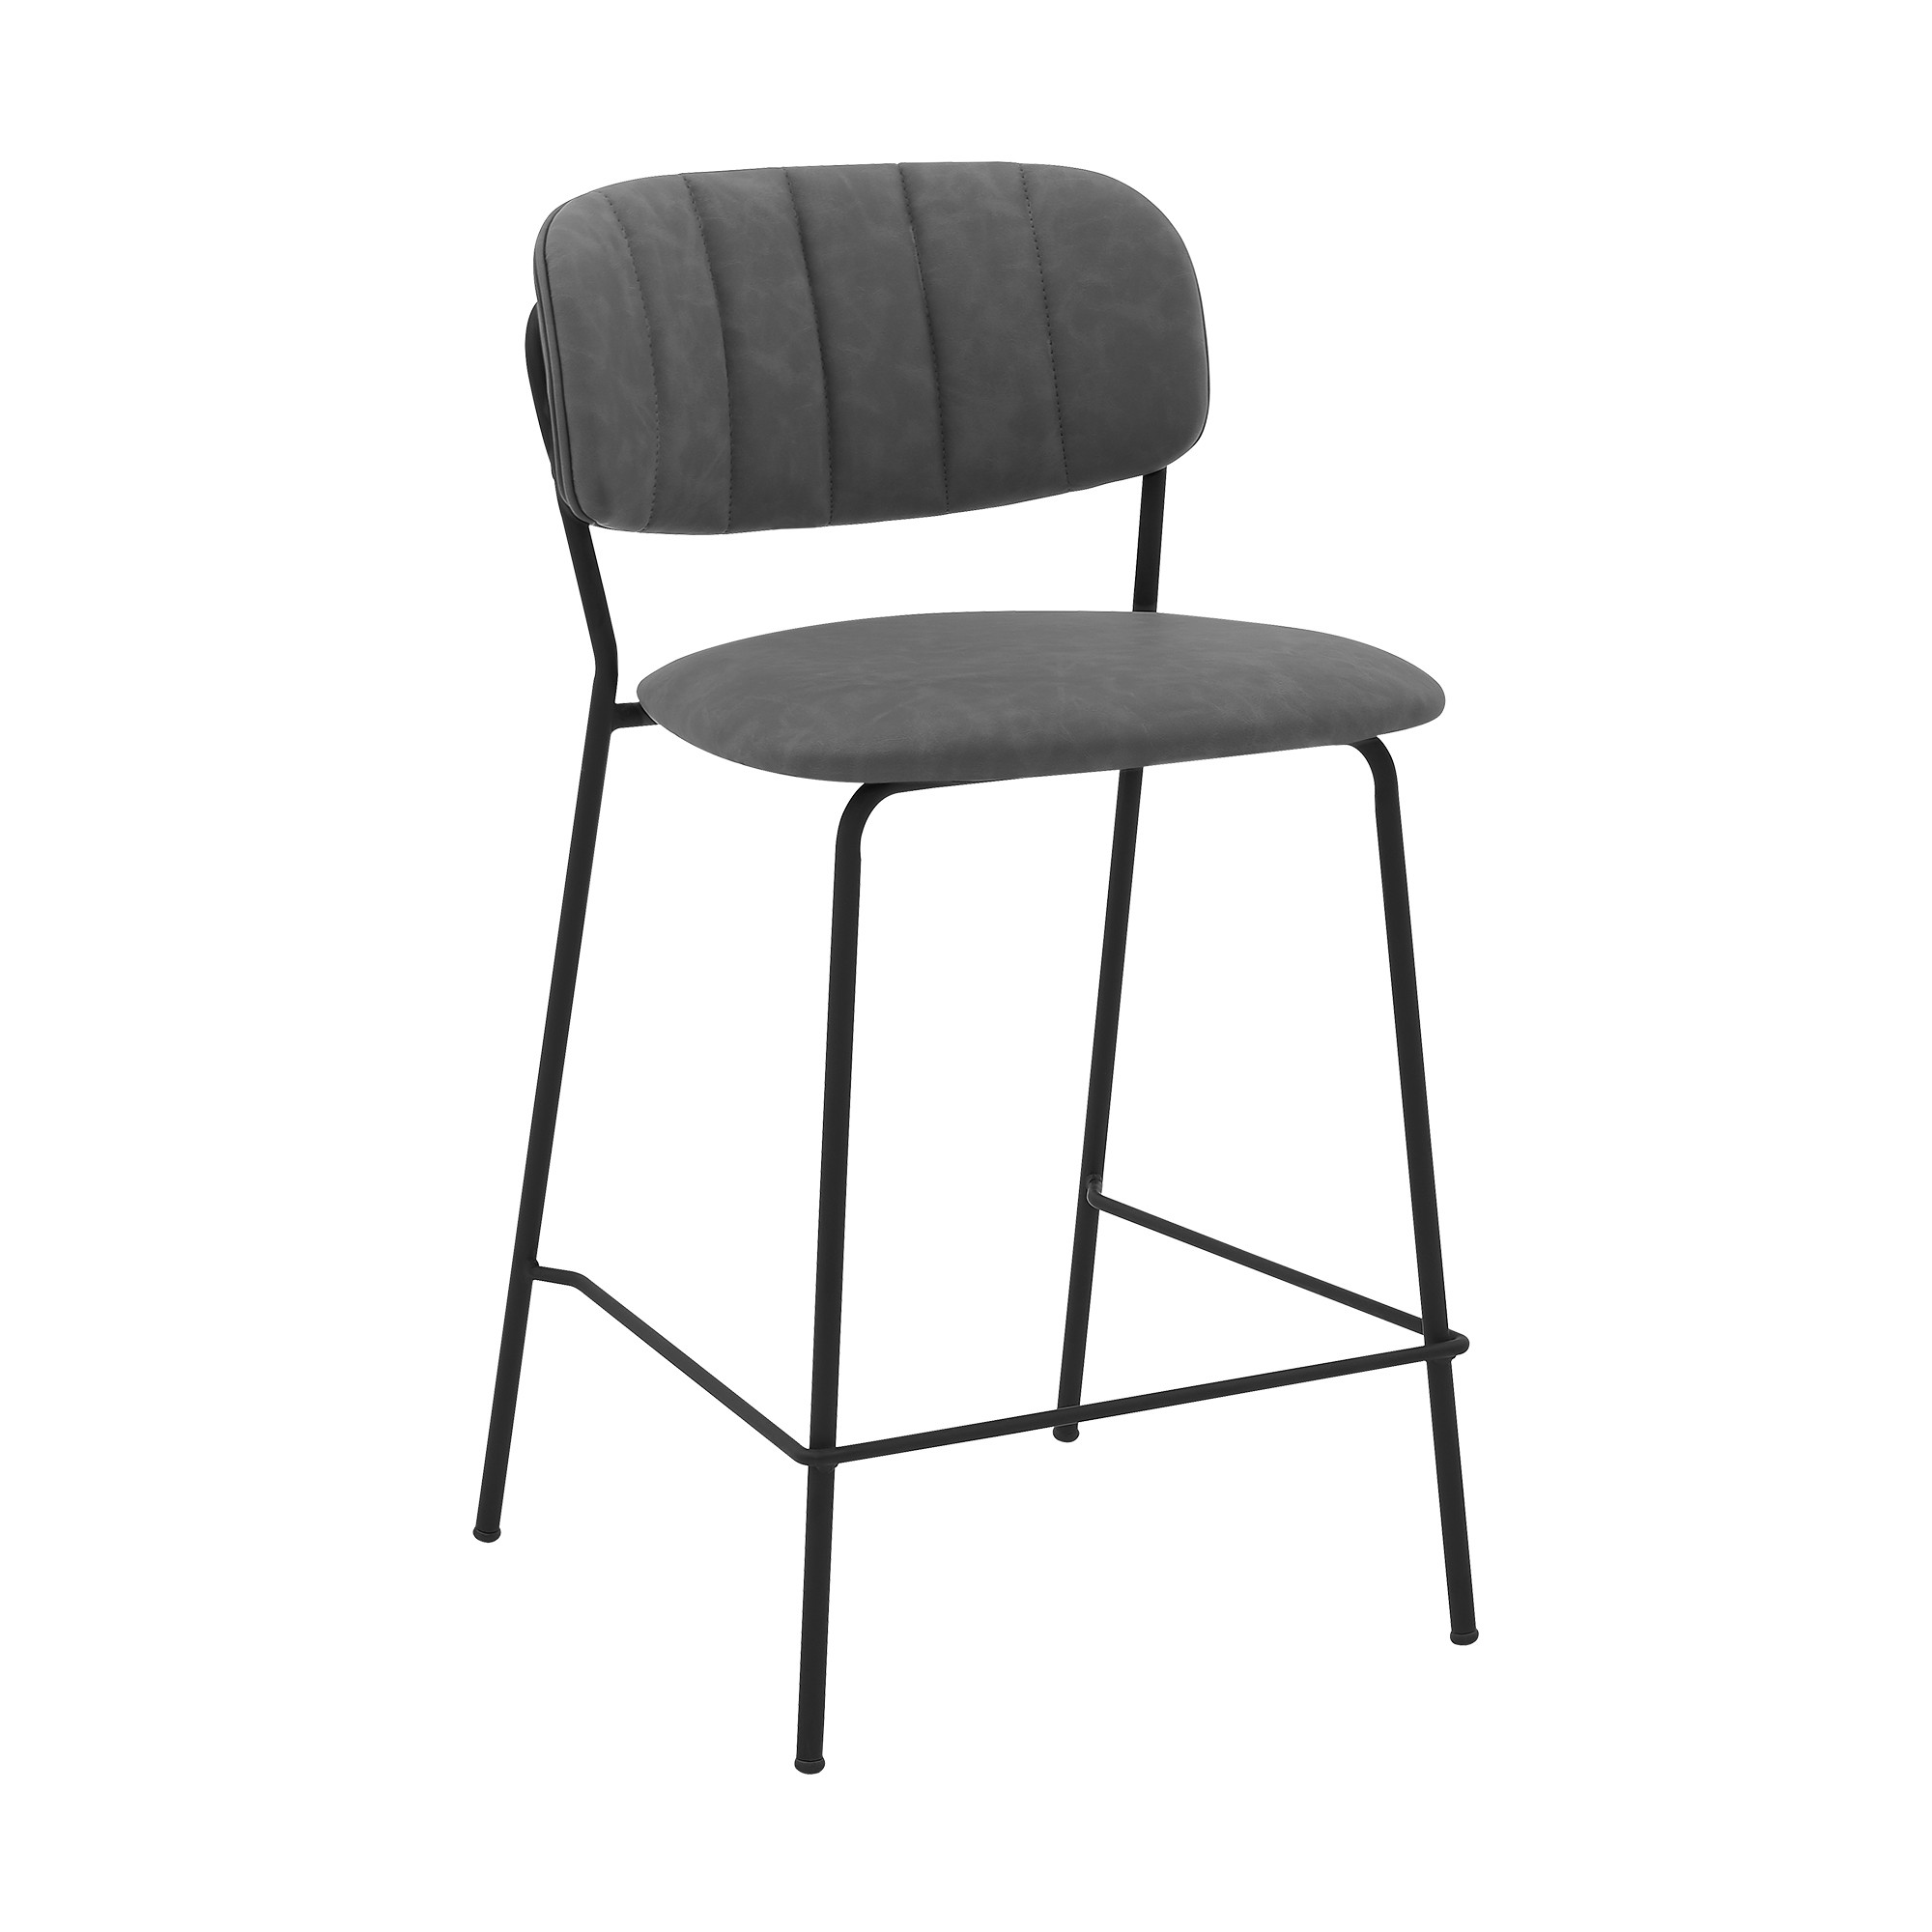 26" Mod Grey Faux Leather Bar Stool with Black Metal Frame